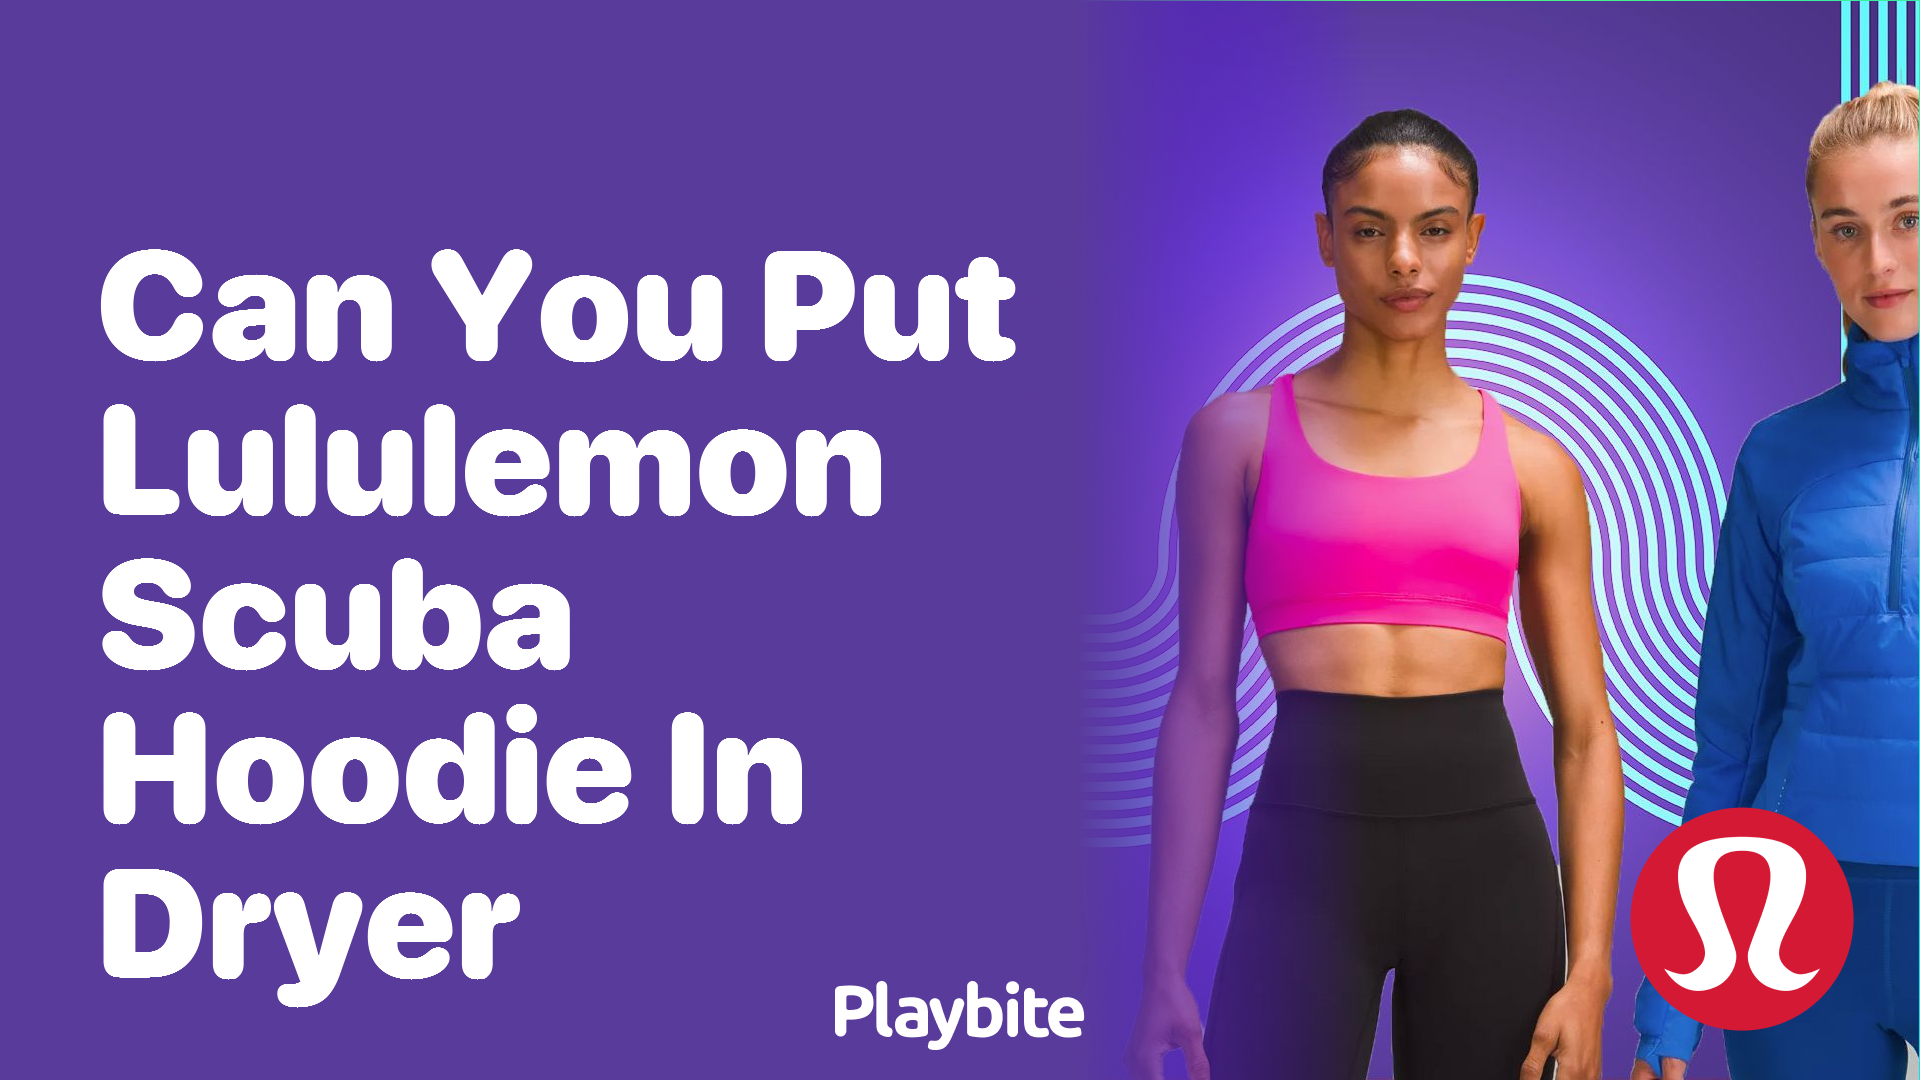 Can You Put Lululemon Scuba Hoodie in the Dryer? - Playbite